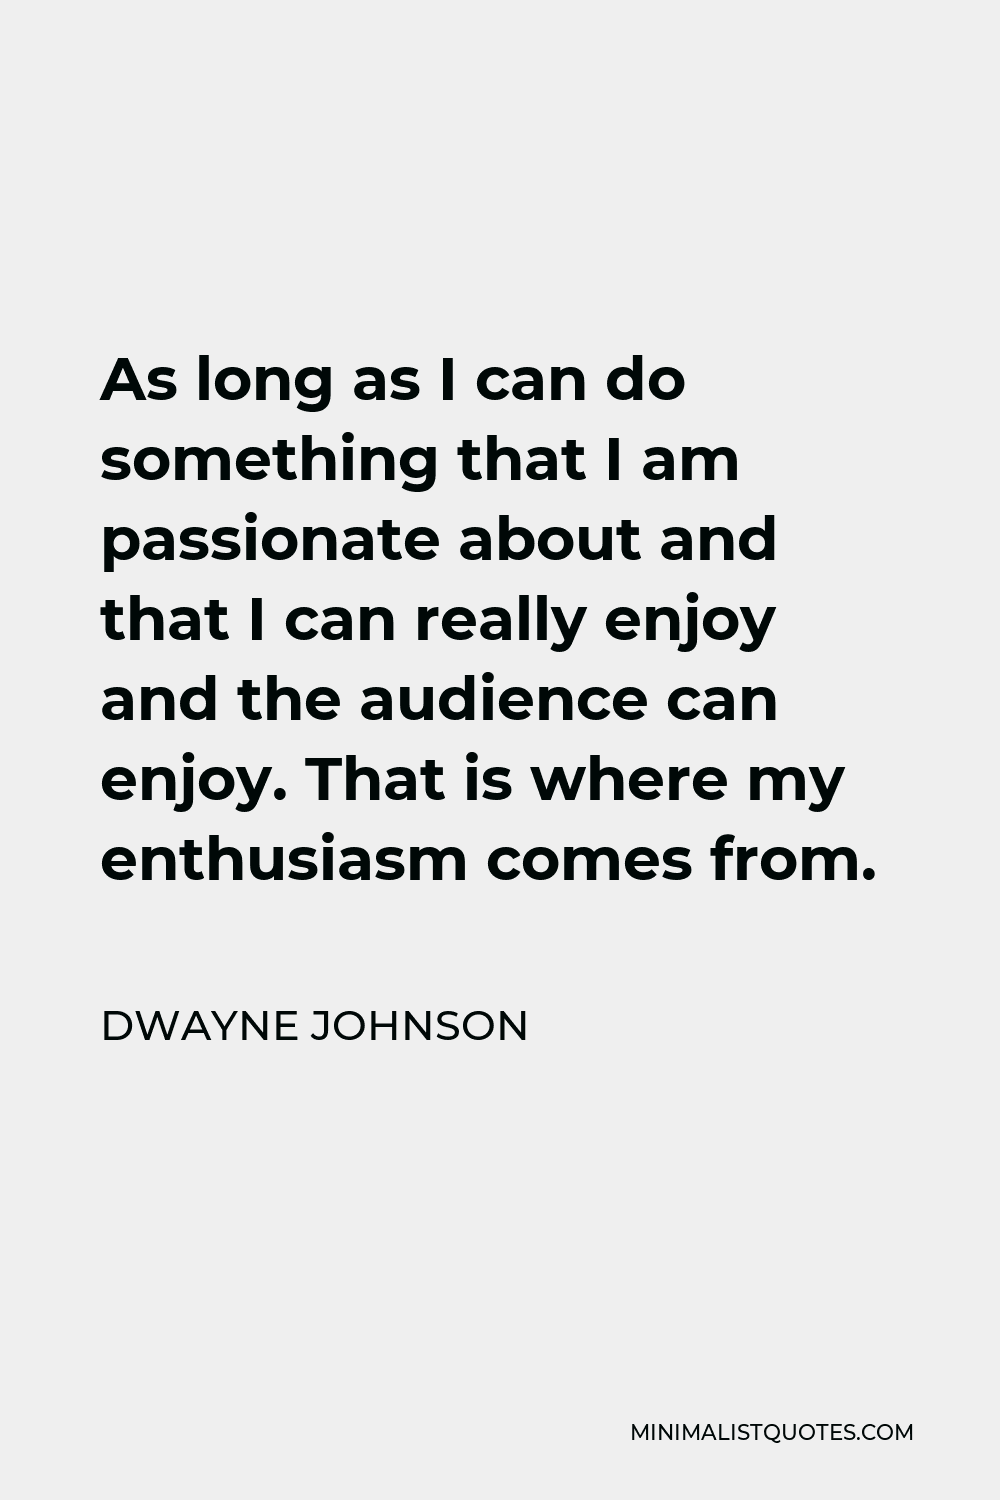 Dwayne Johnson Quote - As long as I can do something that I am passionate about and that I can really enjoy and the audience can enjoy. That is where my enthusiasm comes from.